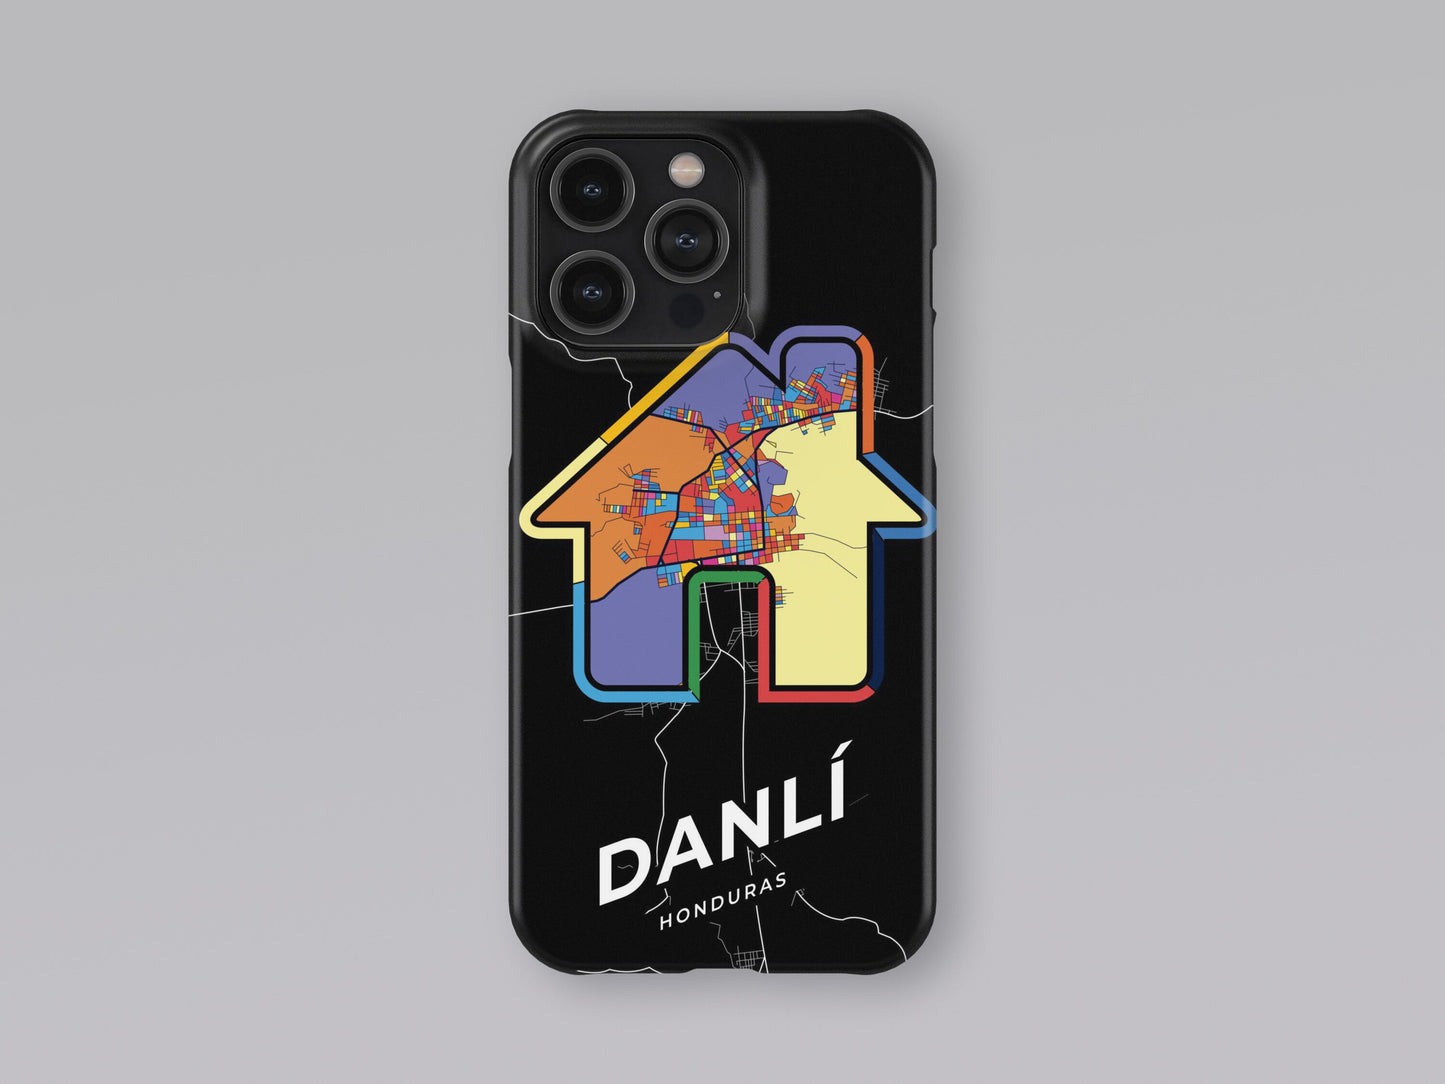 Danlí Honduras slim phone case with colorful icon. Birthday, wedding or housewarming gift. Couple match cases. 3